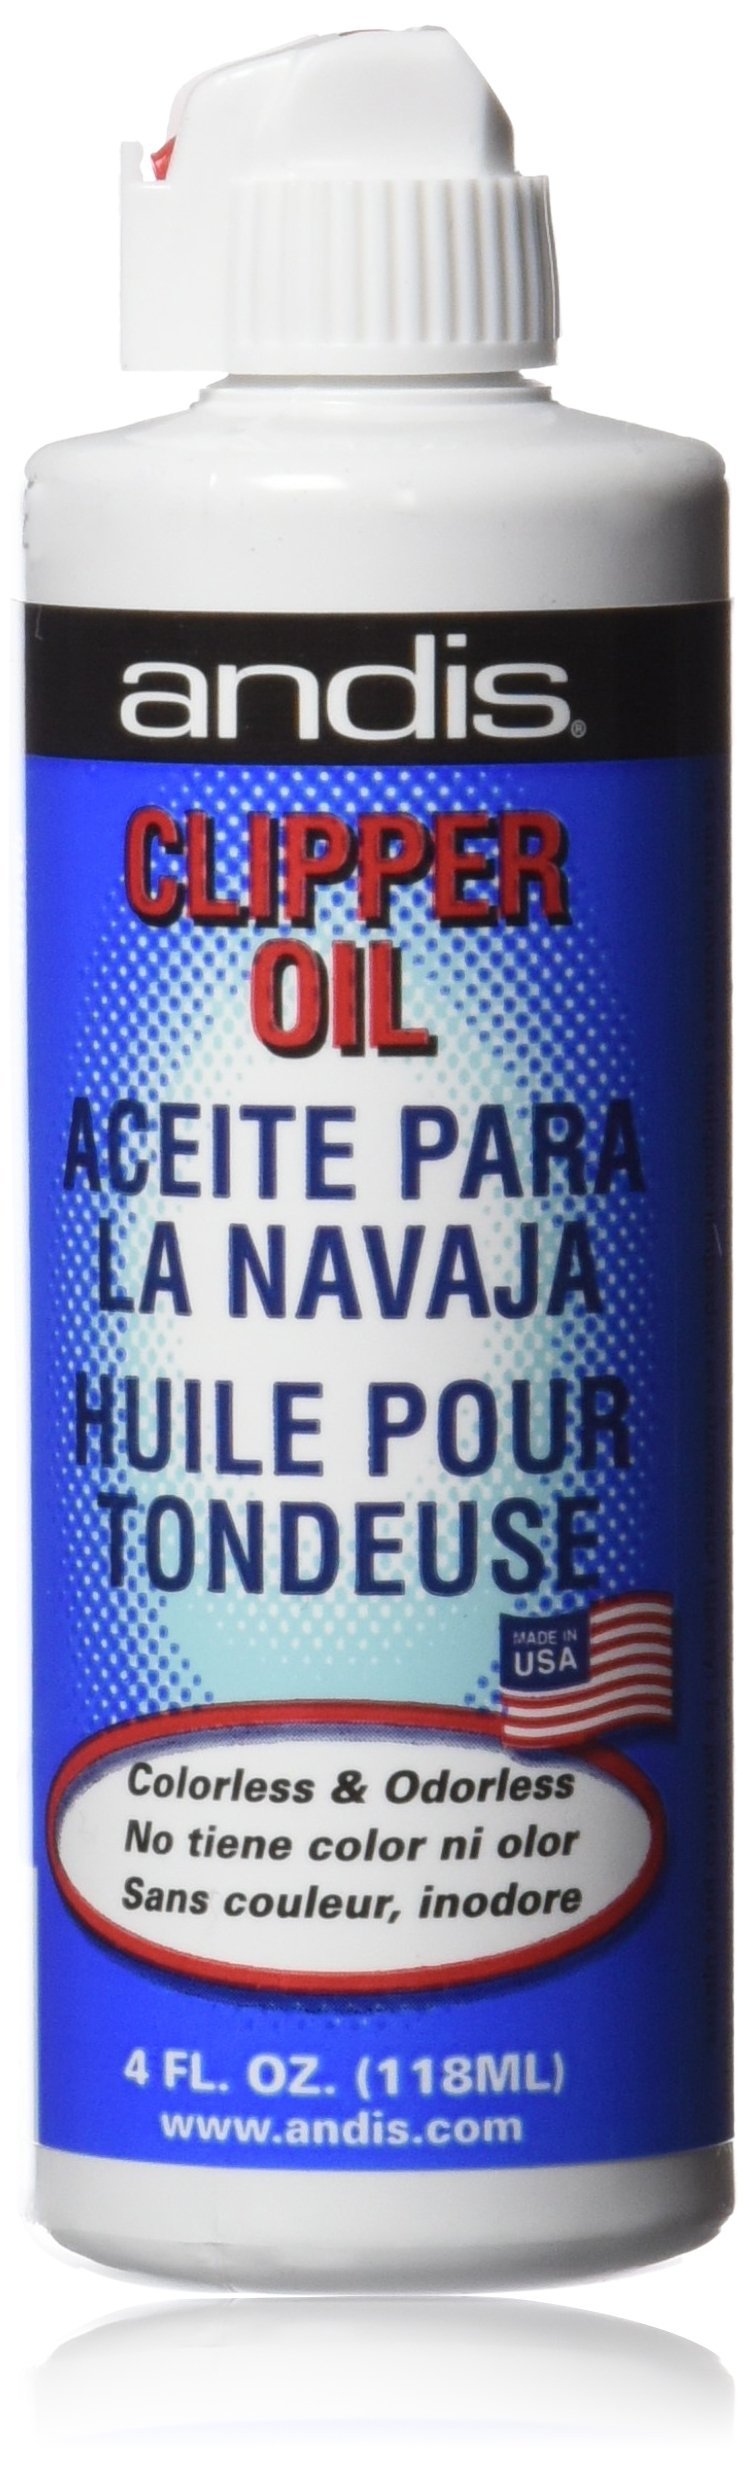 Andis Clipper Oil 4 Fl Oz (Pack of 1)